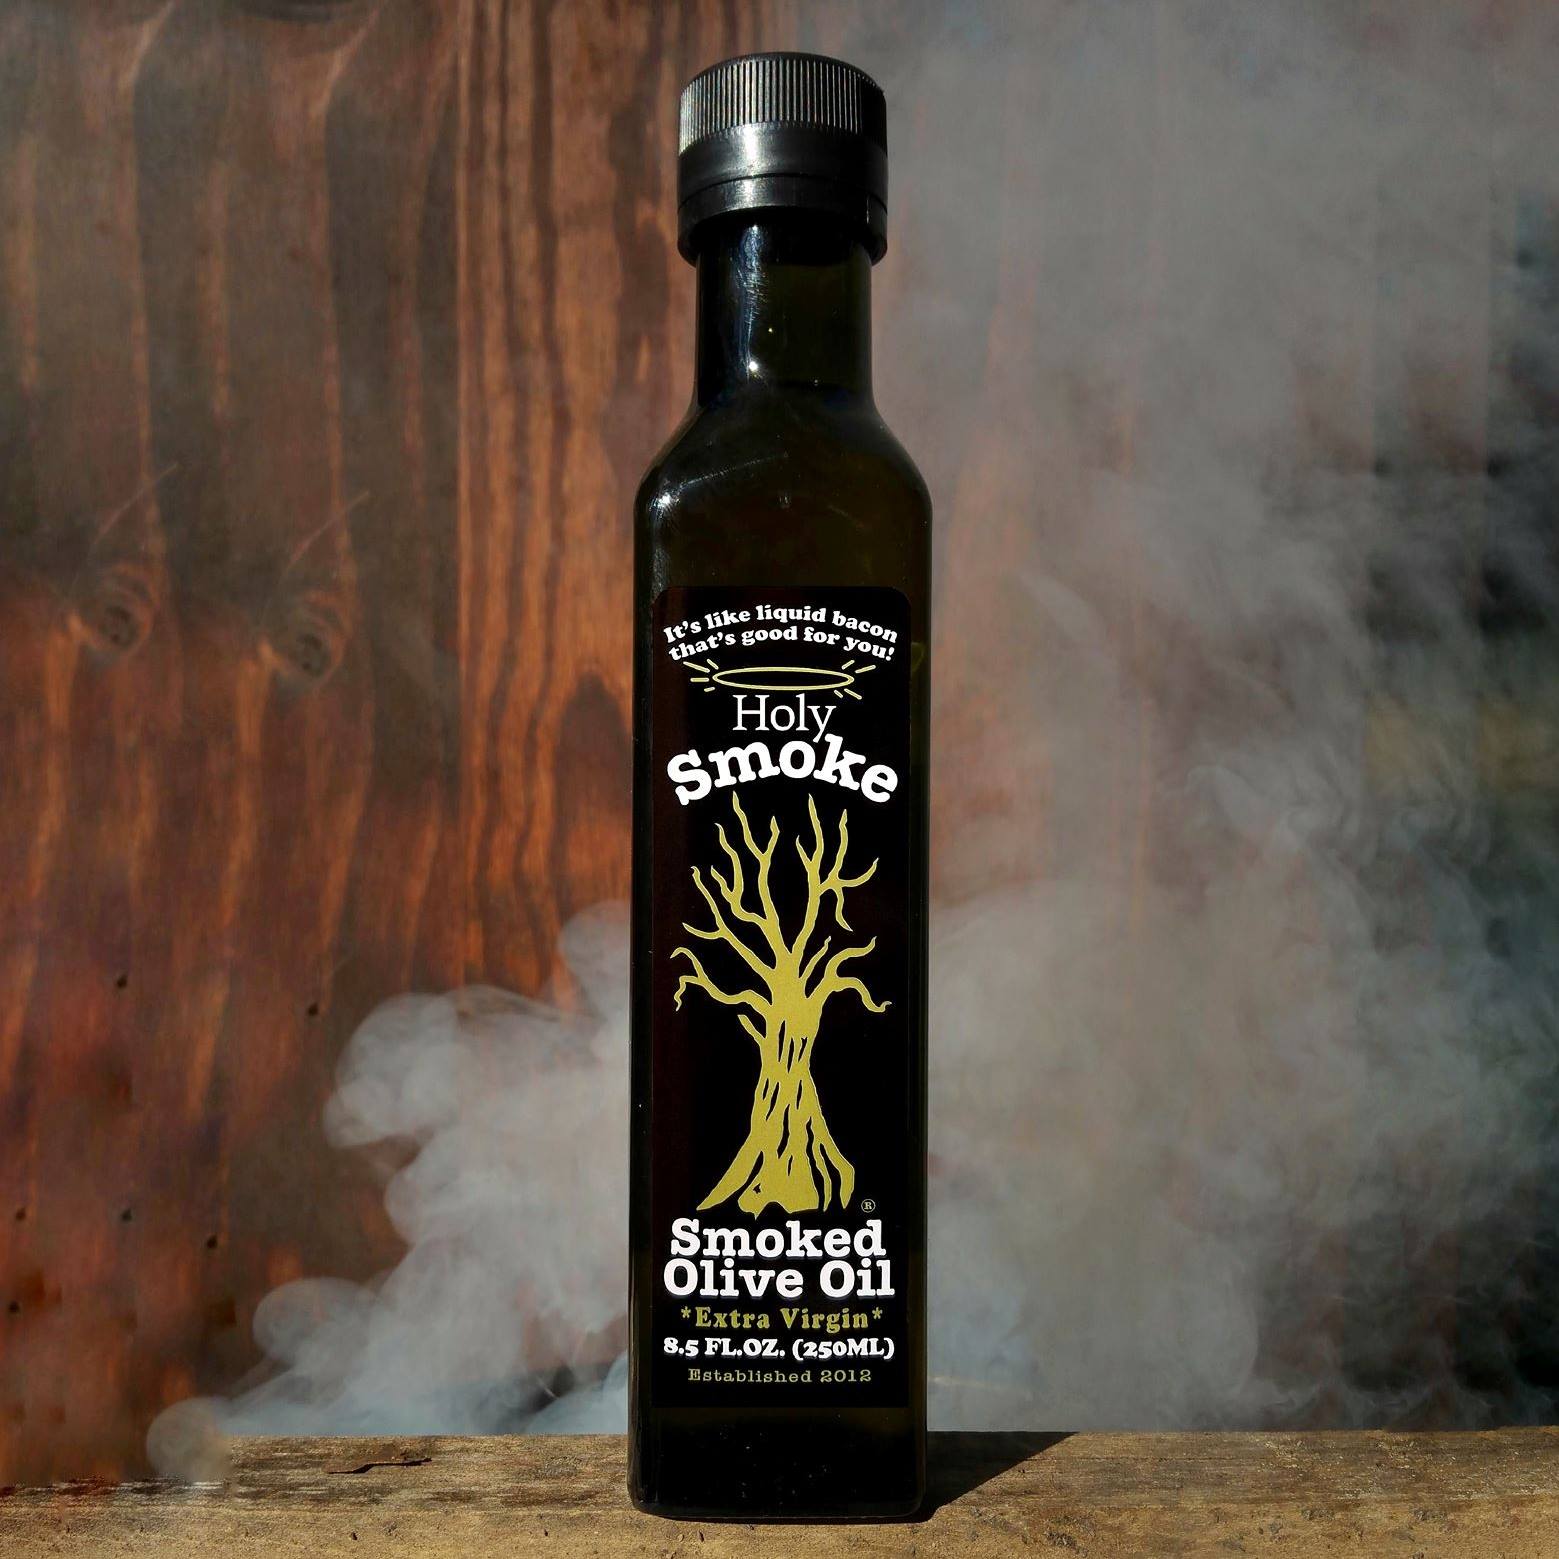 Meet the Makers: Max Blackman & Kyle Payne of Holy Smoke Smoked Olive Oil